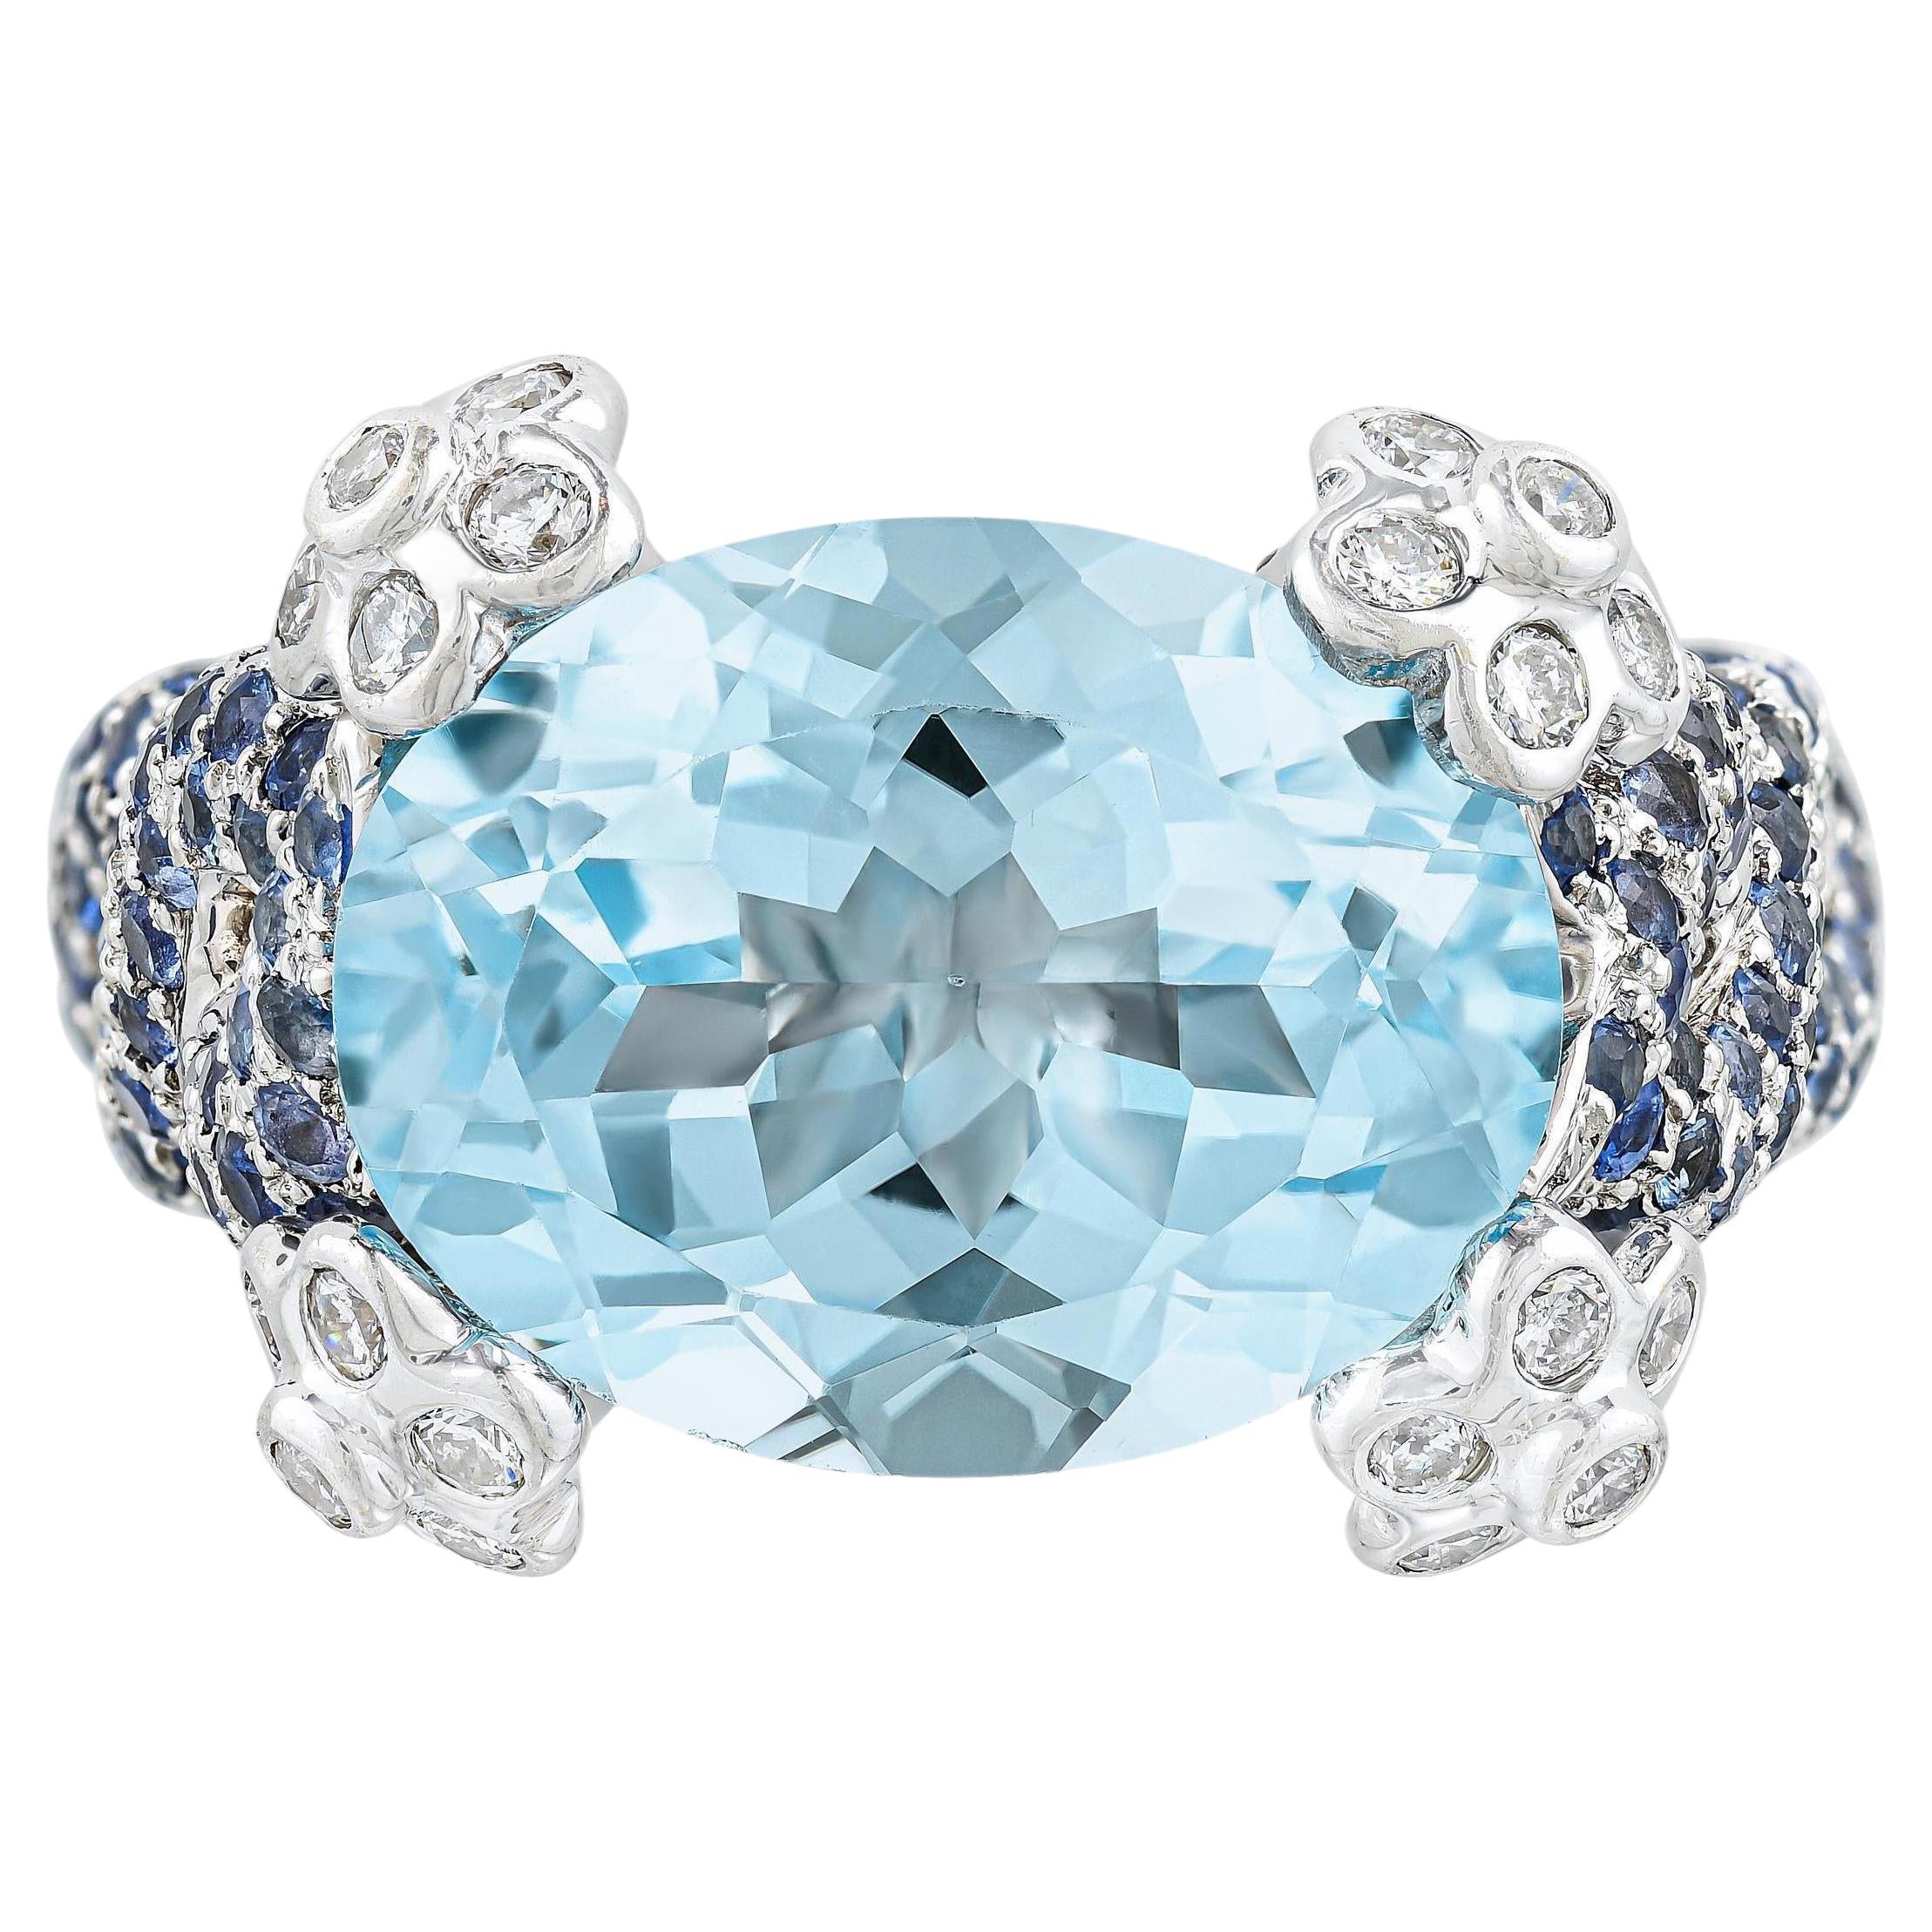 Natural Oval Aquamarine Ring Blue Sapphires and Diamonds Setting 7.79 Carats 18K